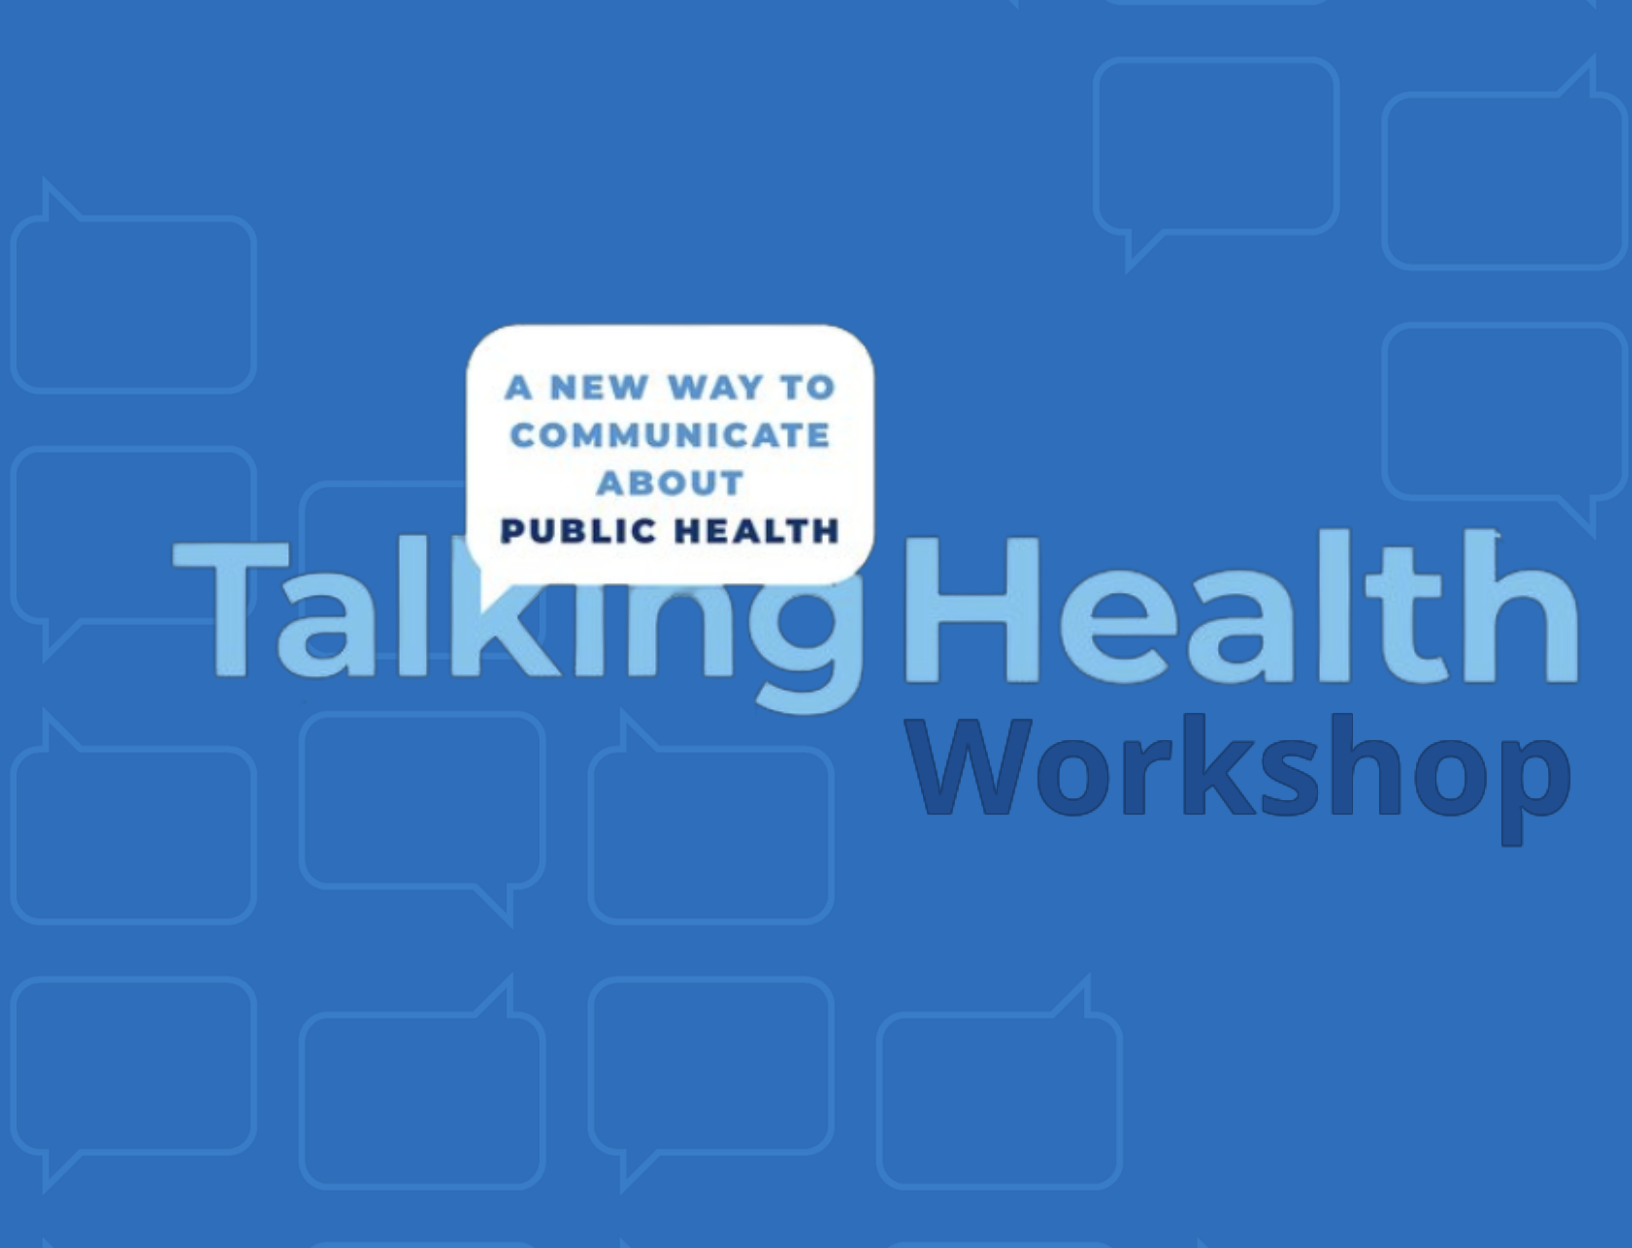 the front page of the presentation for the Talking Health training which says "Talking Health Workshop" and the de Beaumont Foundation logo